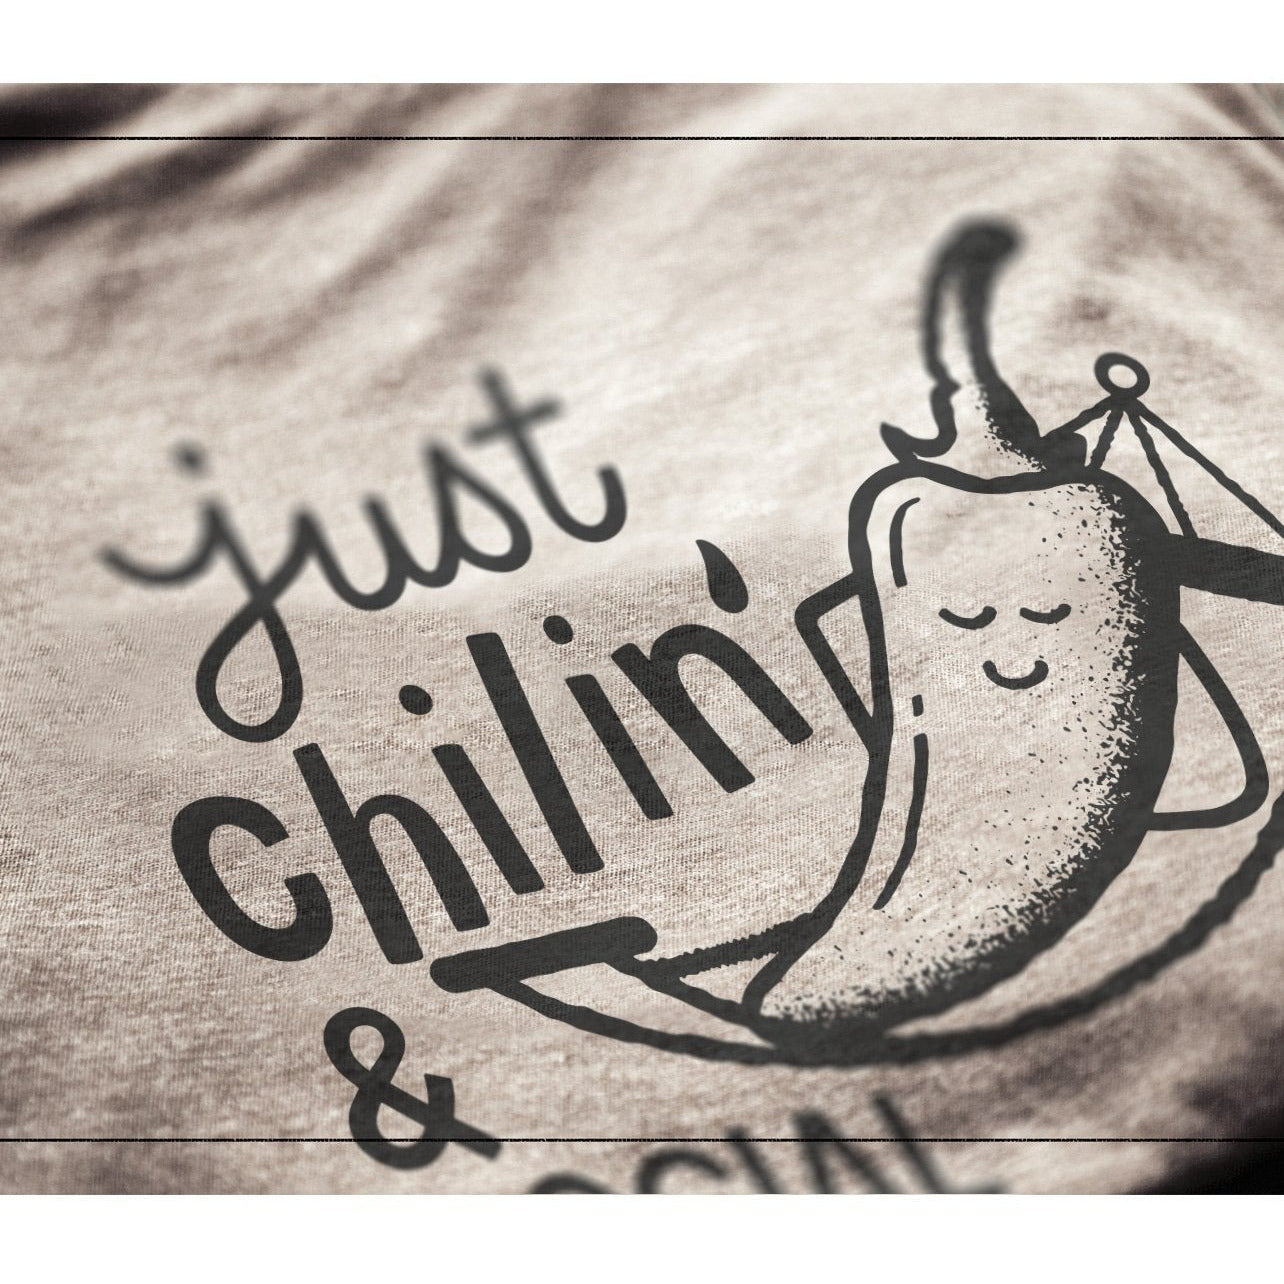 Just Chilin And Social Distancin - Stories You Can Wear by Thread Tank